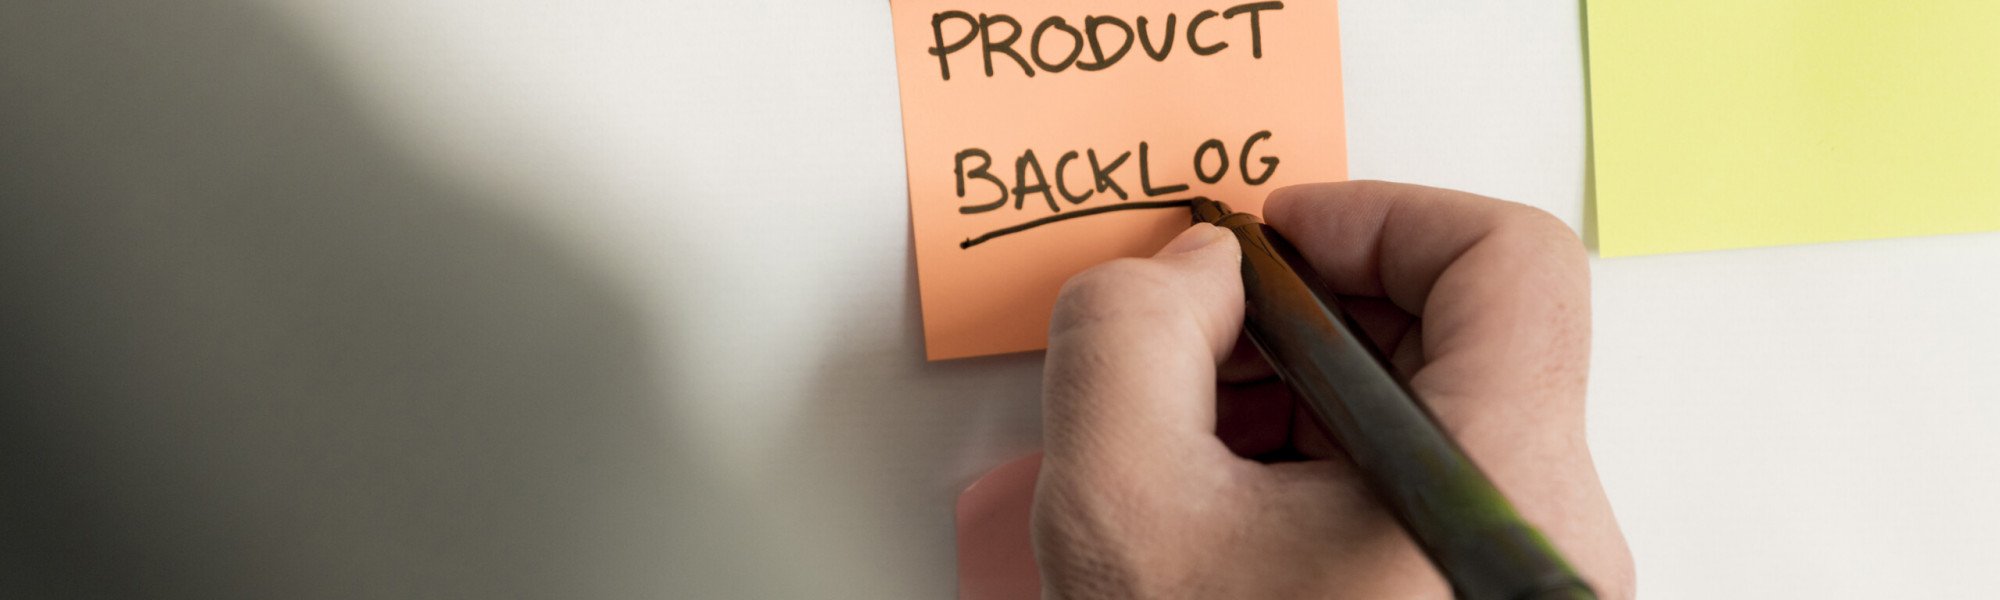 close-up-sticky-note-with-product-backlog